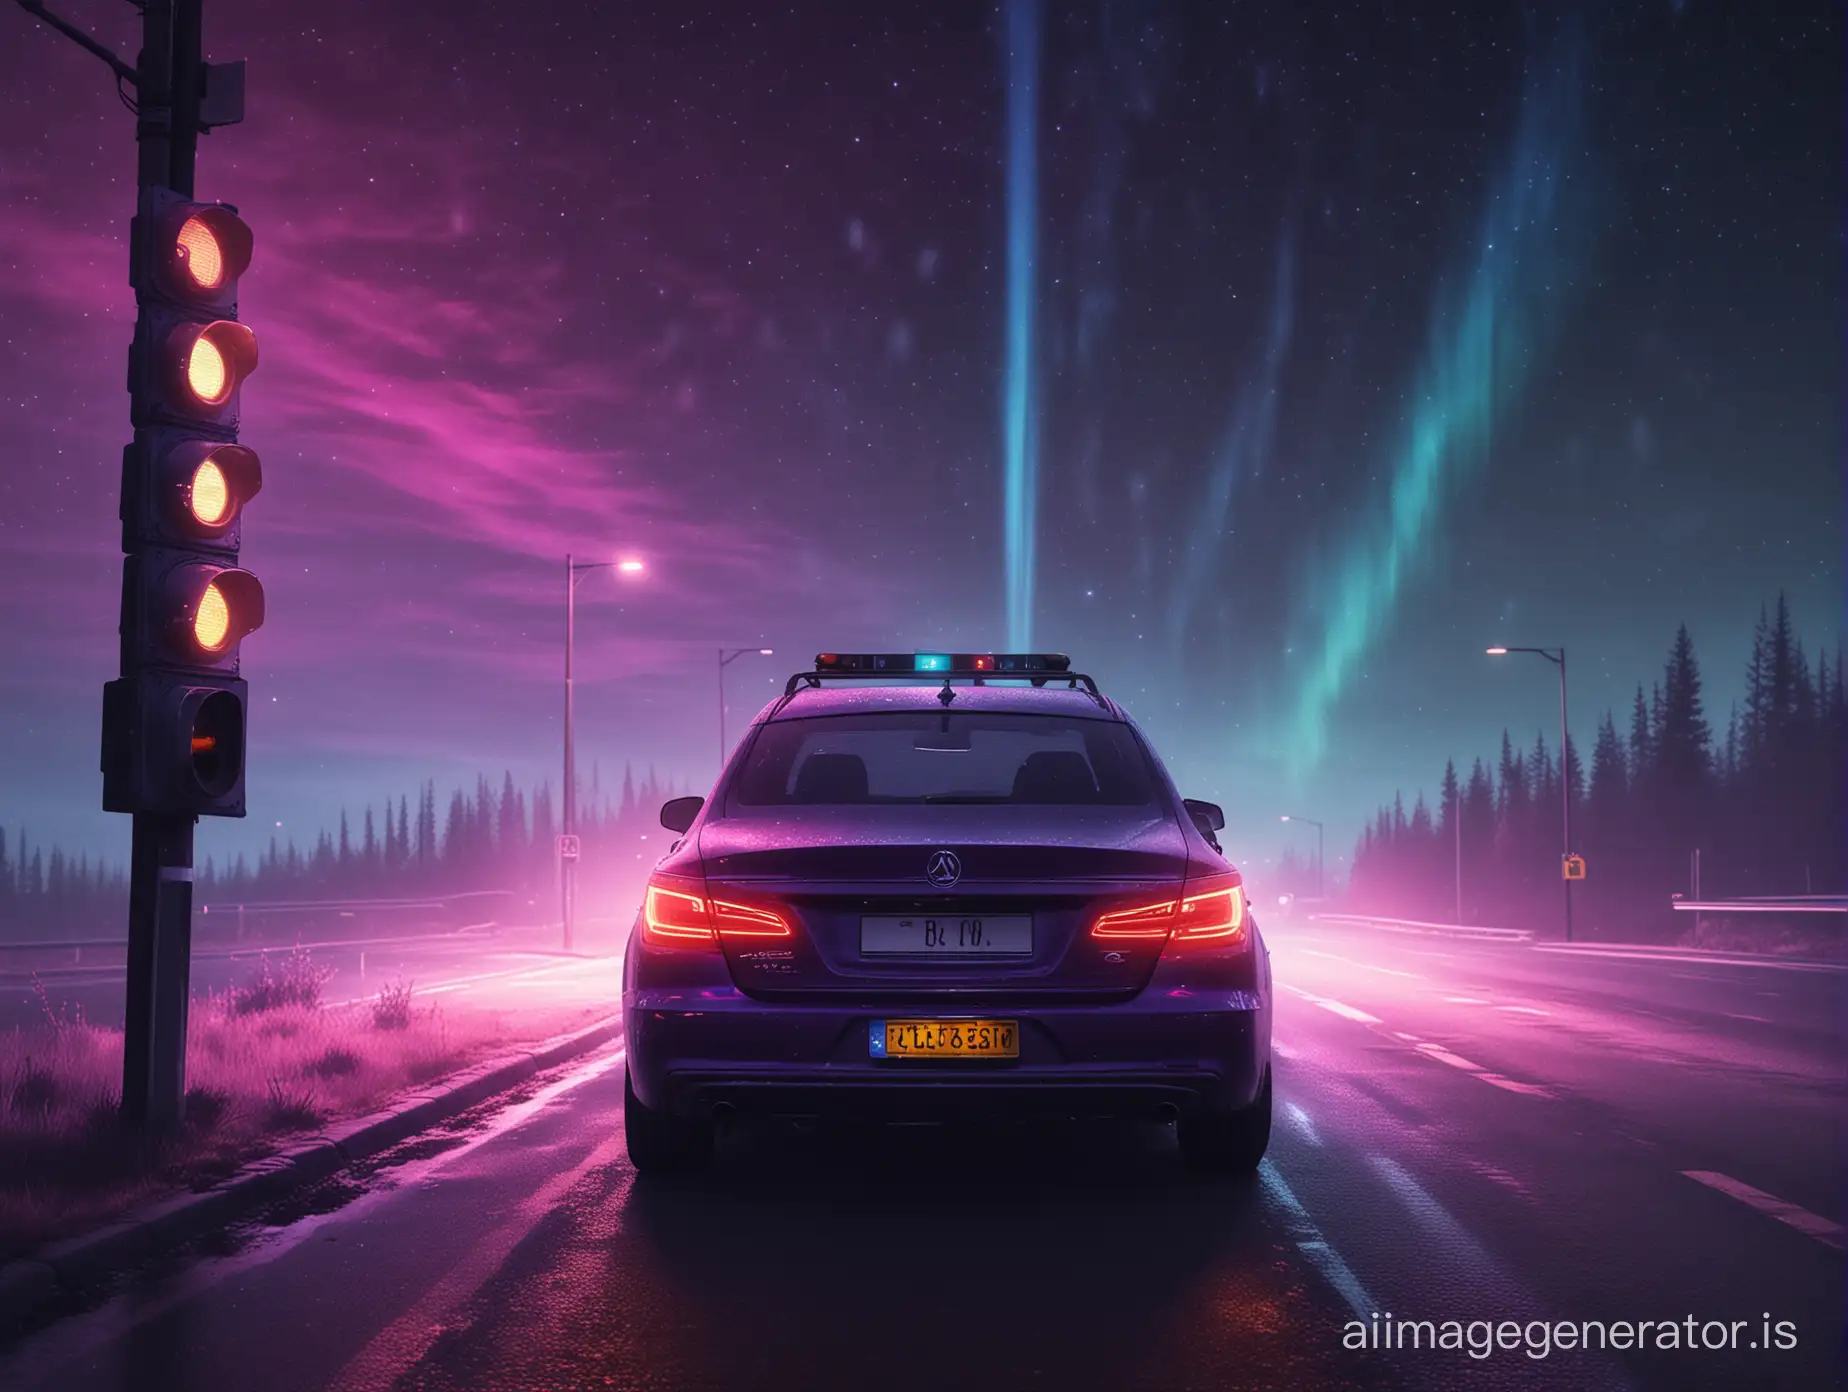 dark night with auroras, a car, (a traffic light with four modes colored in purple, orange, pink and blue), 8k,